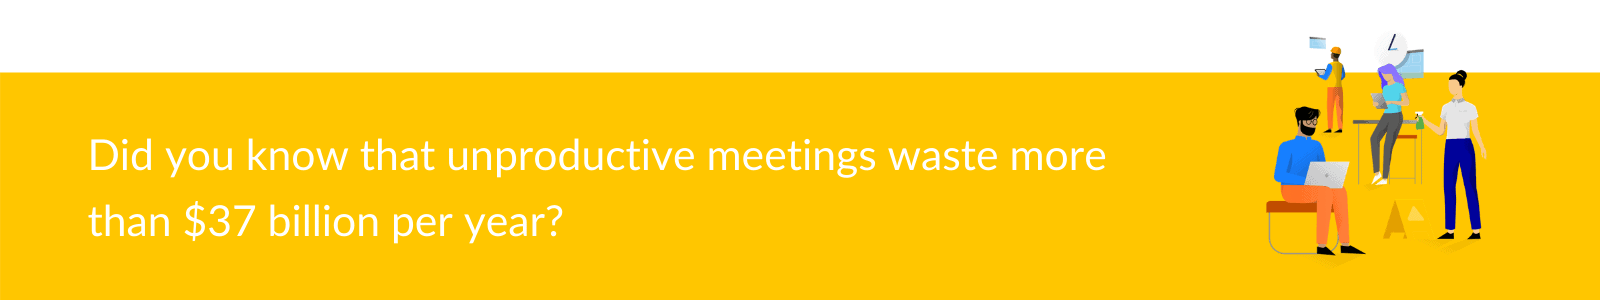 Unproductive meetings waste billions yearly